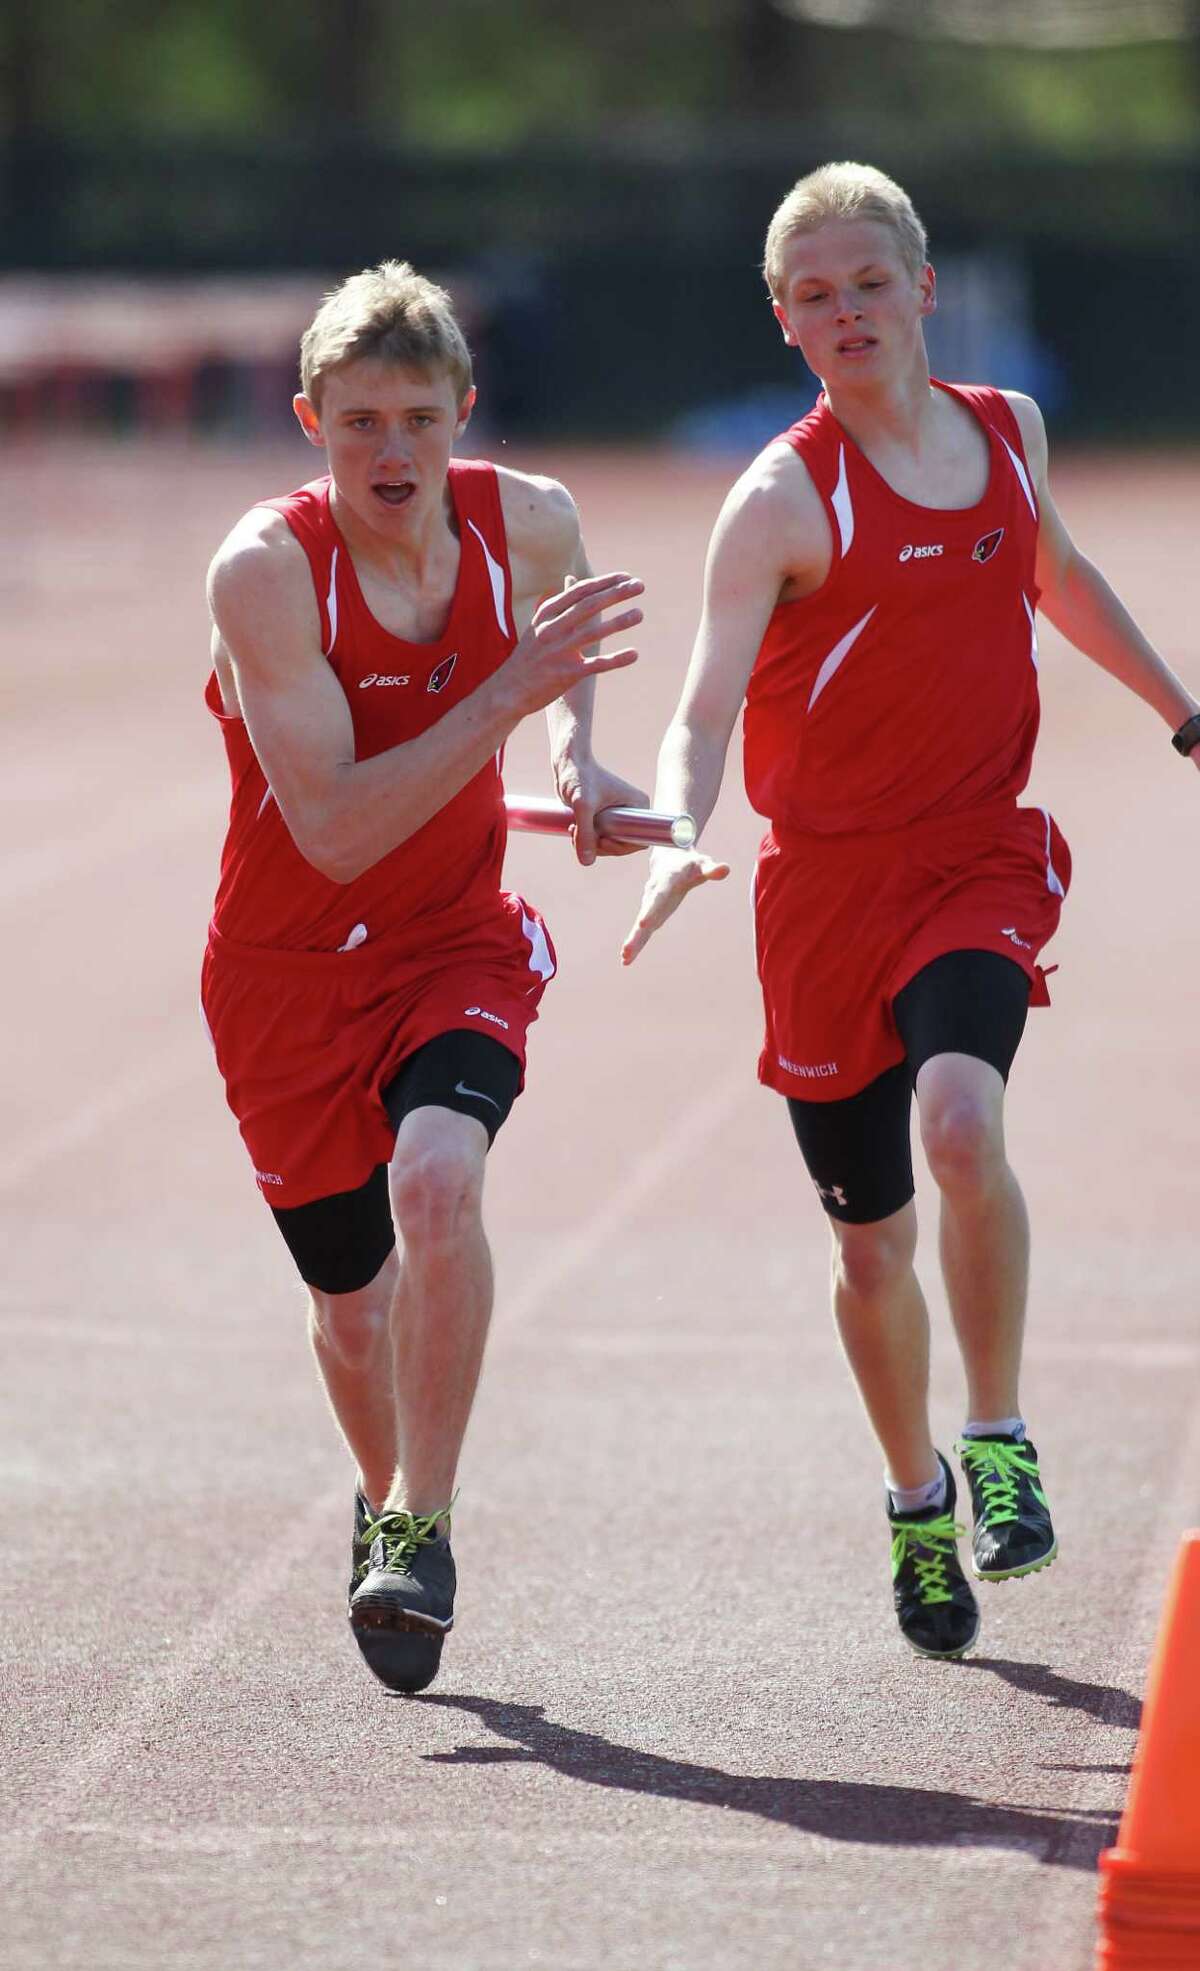 Mark Jaronbach takes the baton from teammate John Sulich for Greenwich High School in the boys 4x800 relay race in Greenwich, Conn. on Monday, April 22, 2013. Greenwich, which hosted the event, took second place in this race.